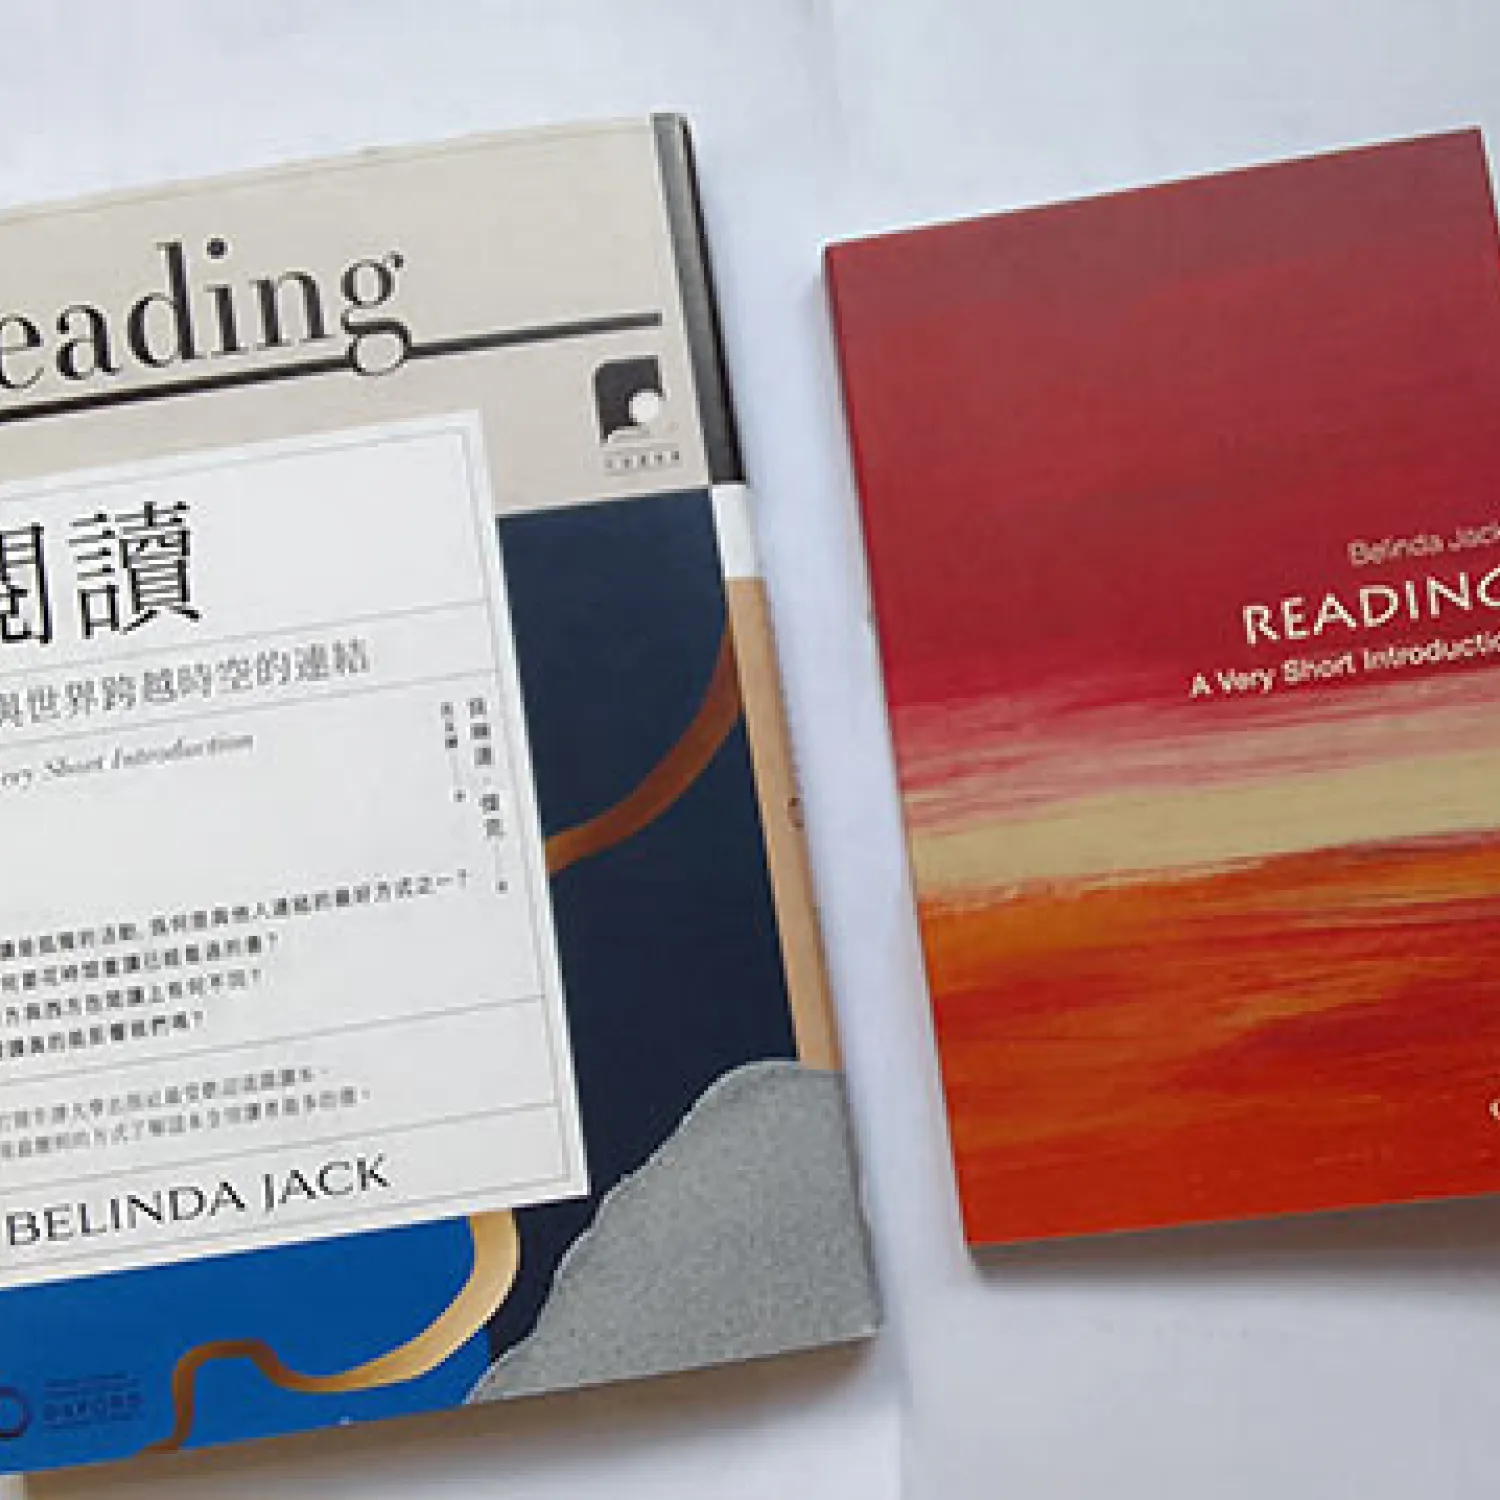 The traditional Chinese edition of Belinda Jack’s Reading